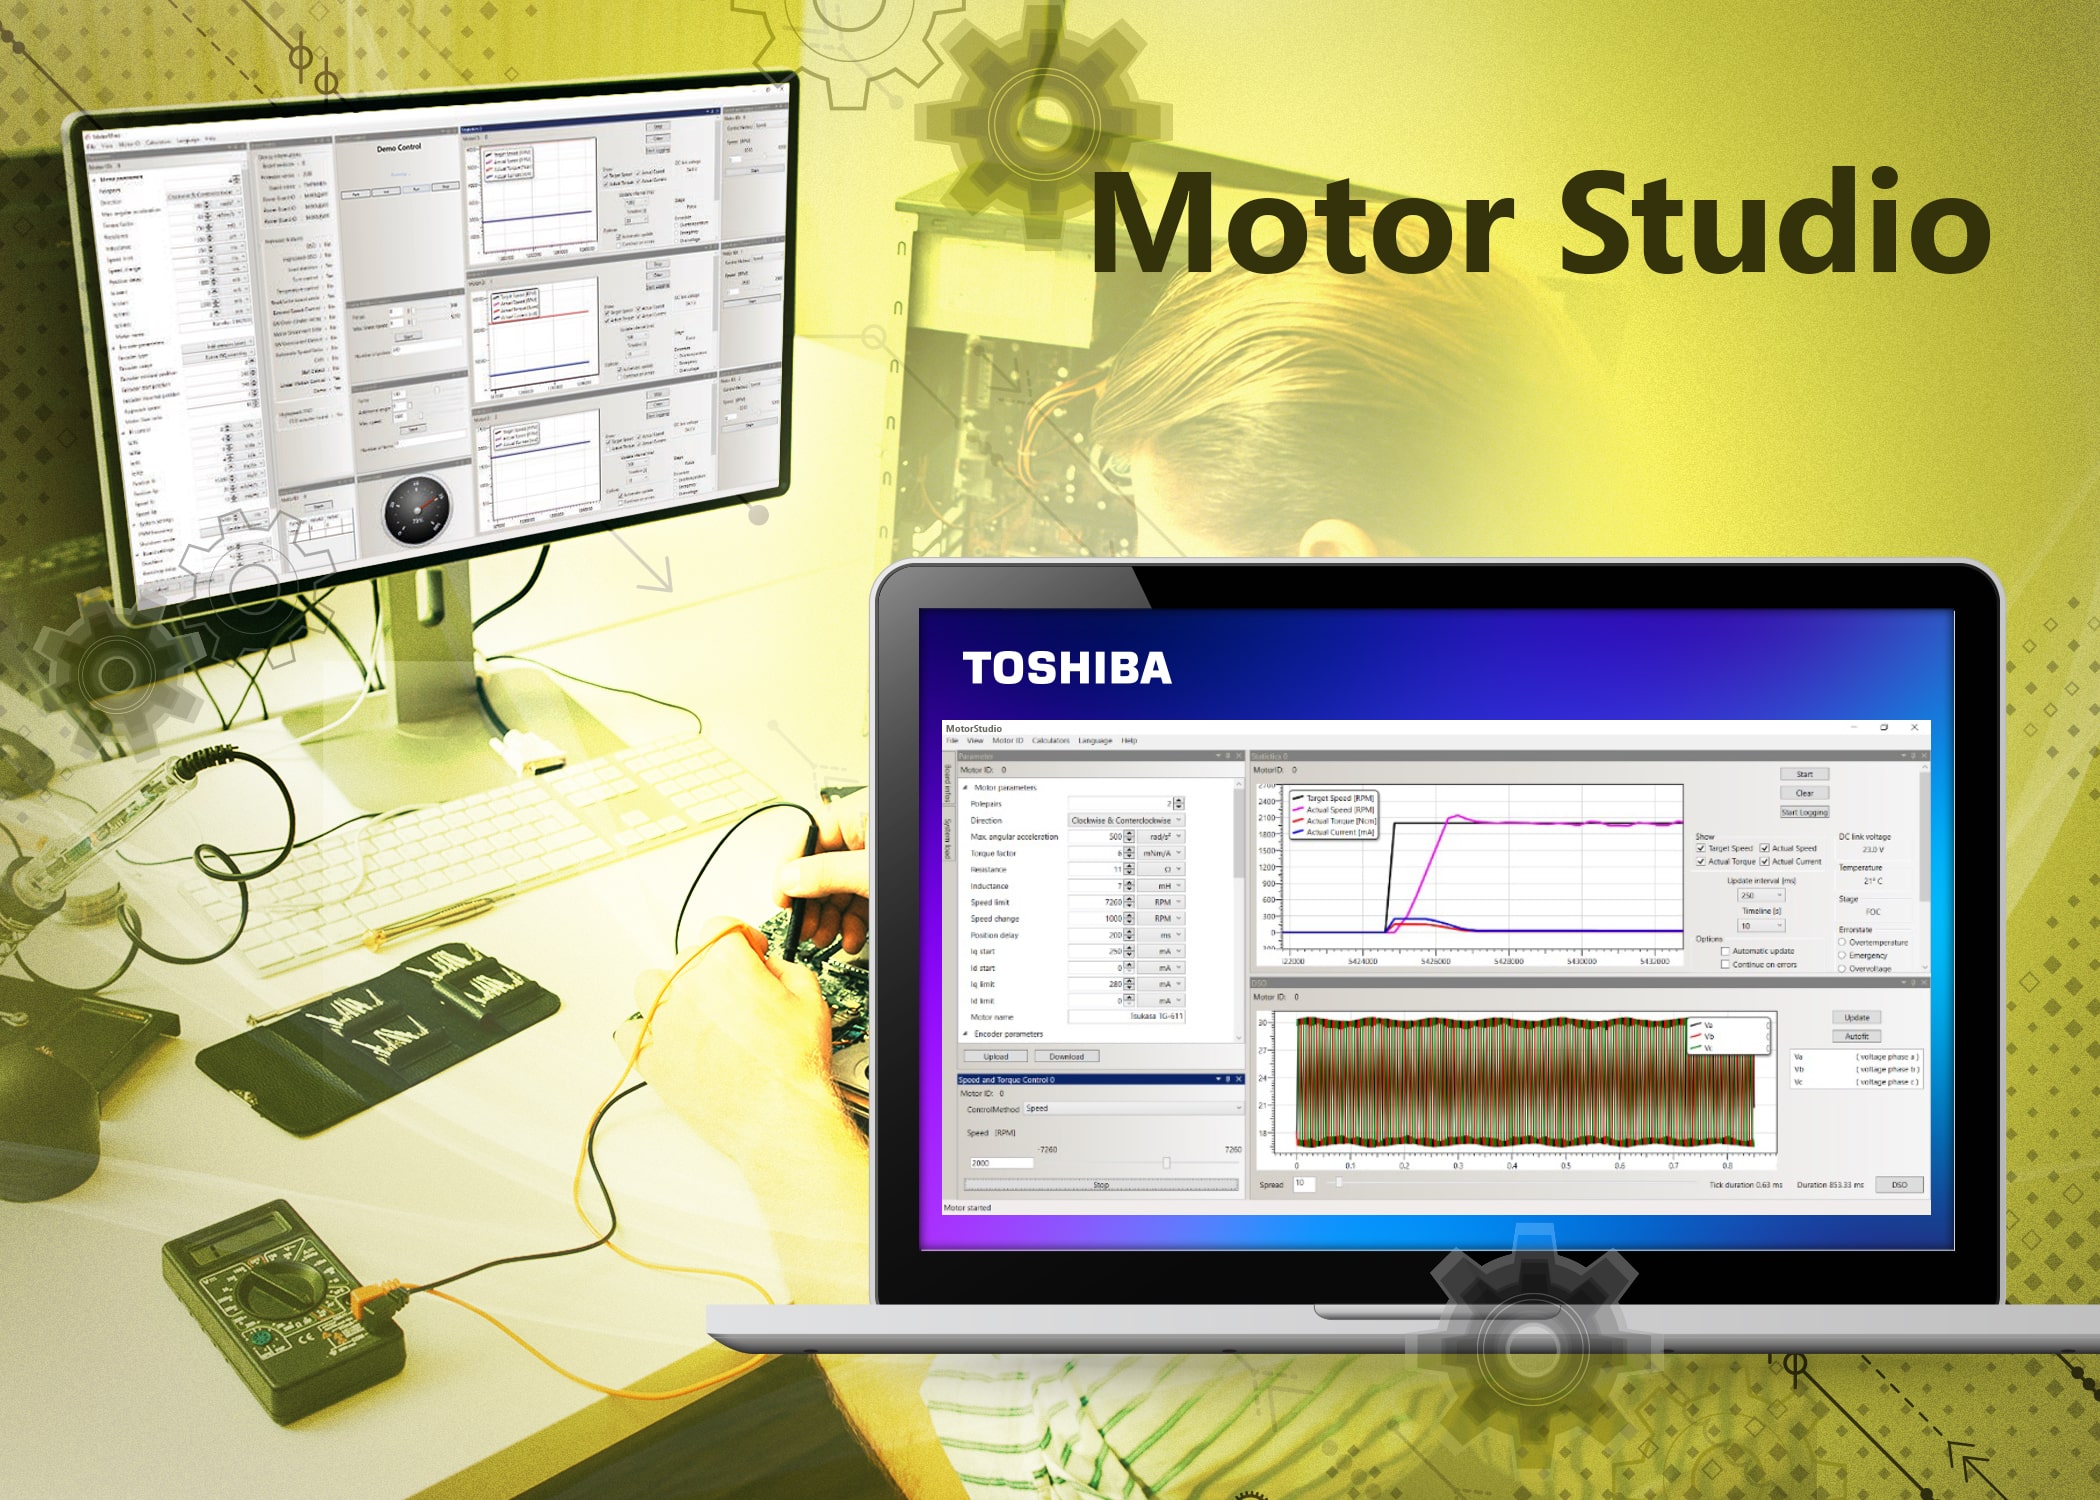 Toshiba simplifies motor control with new software and hardware ecosystem